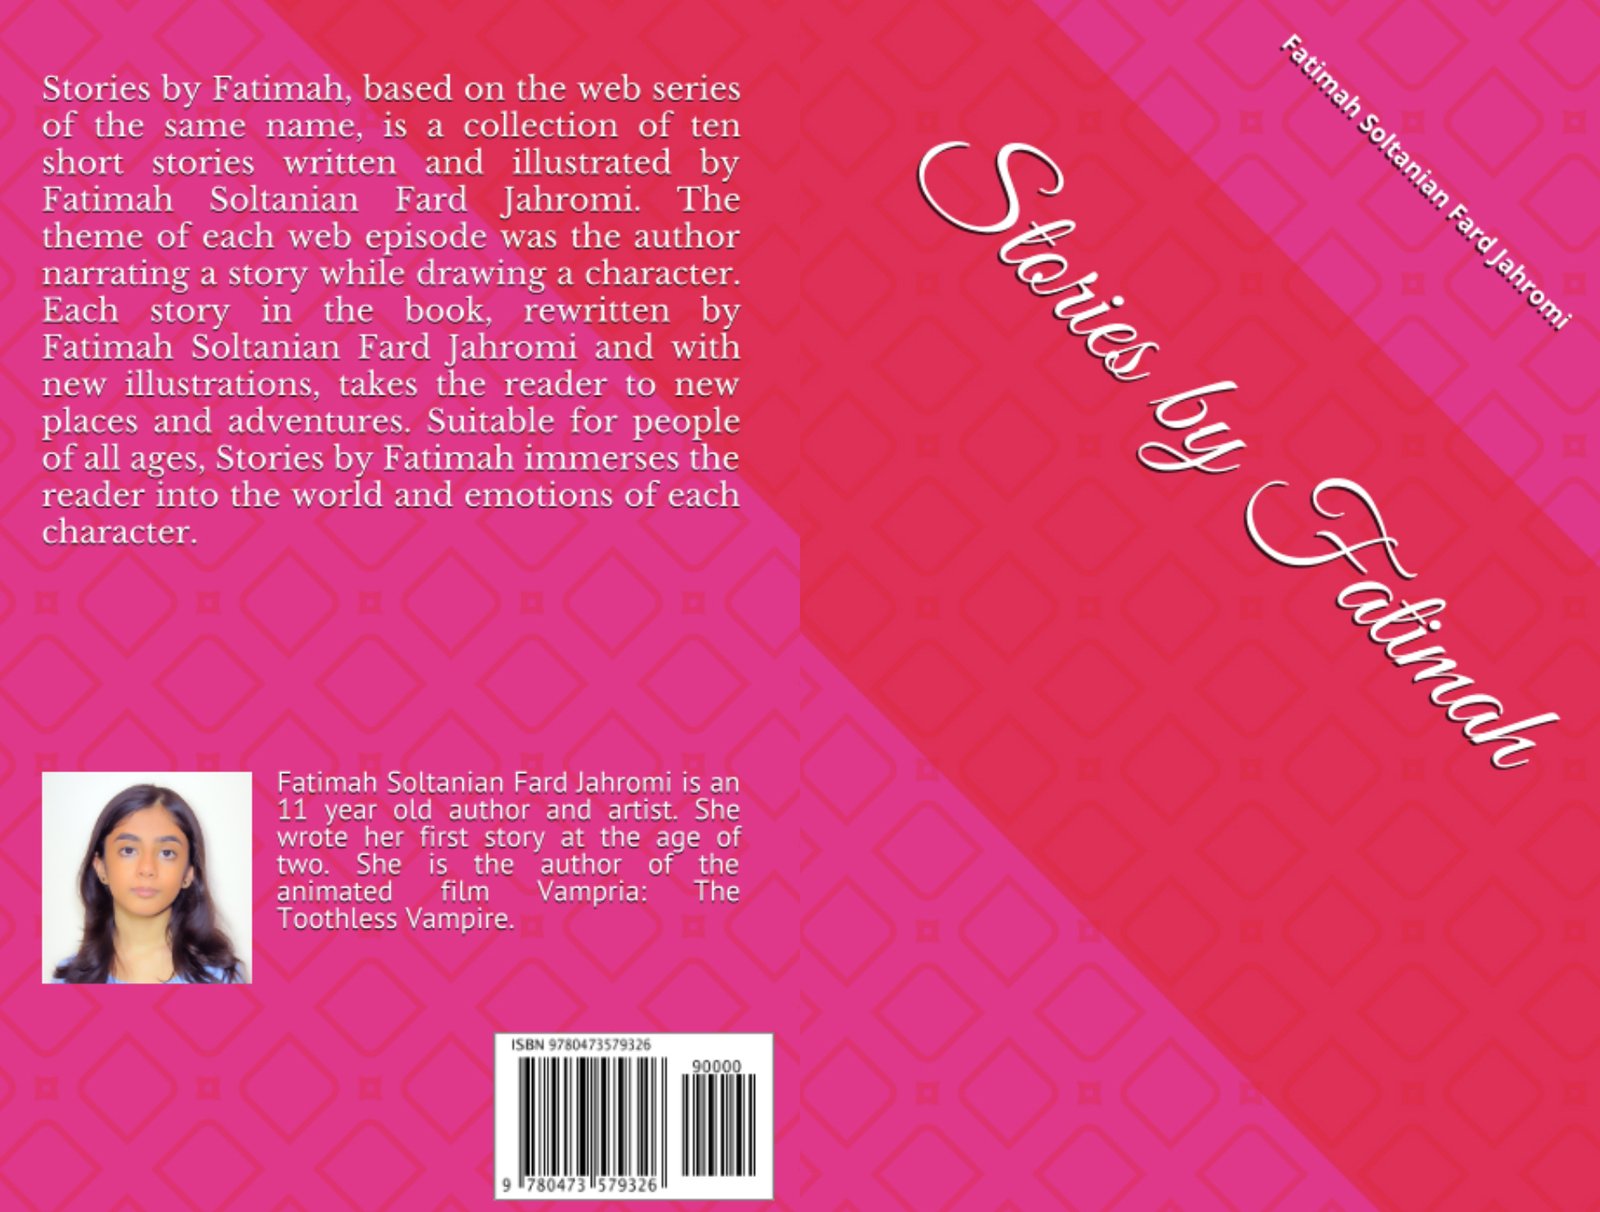 Stories By Fatimah by Fatimah Soltanian Fard Jahromi